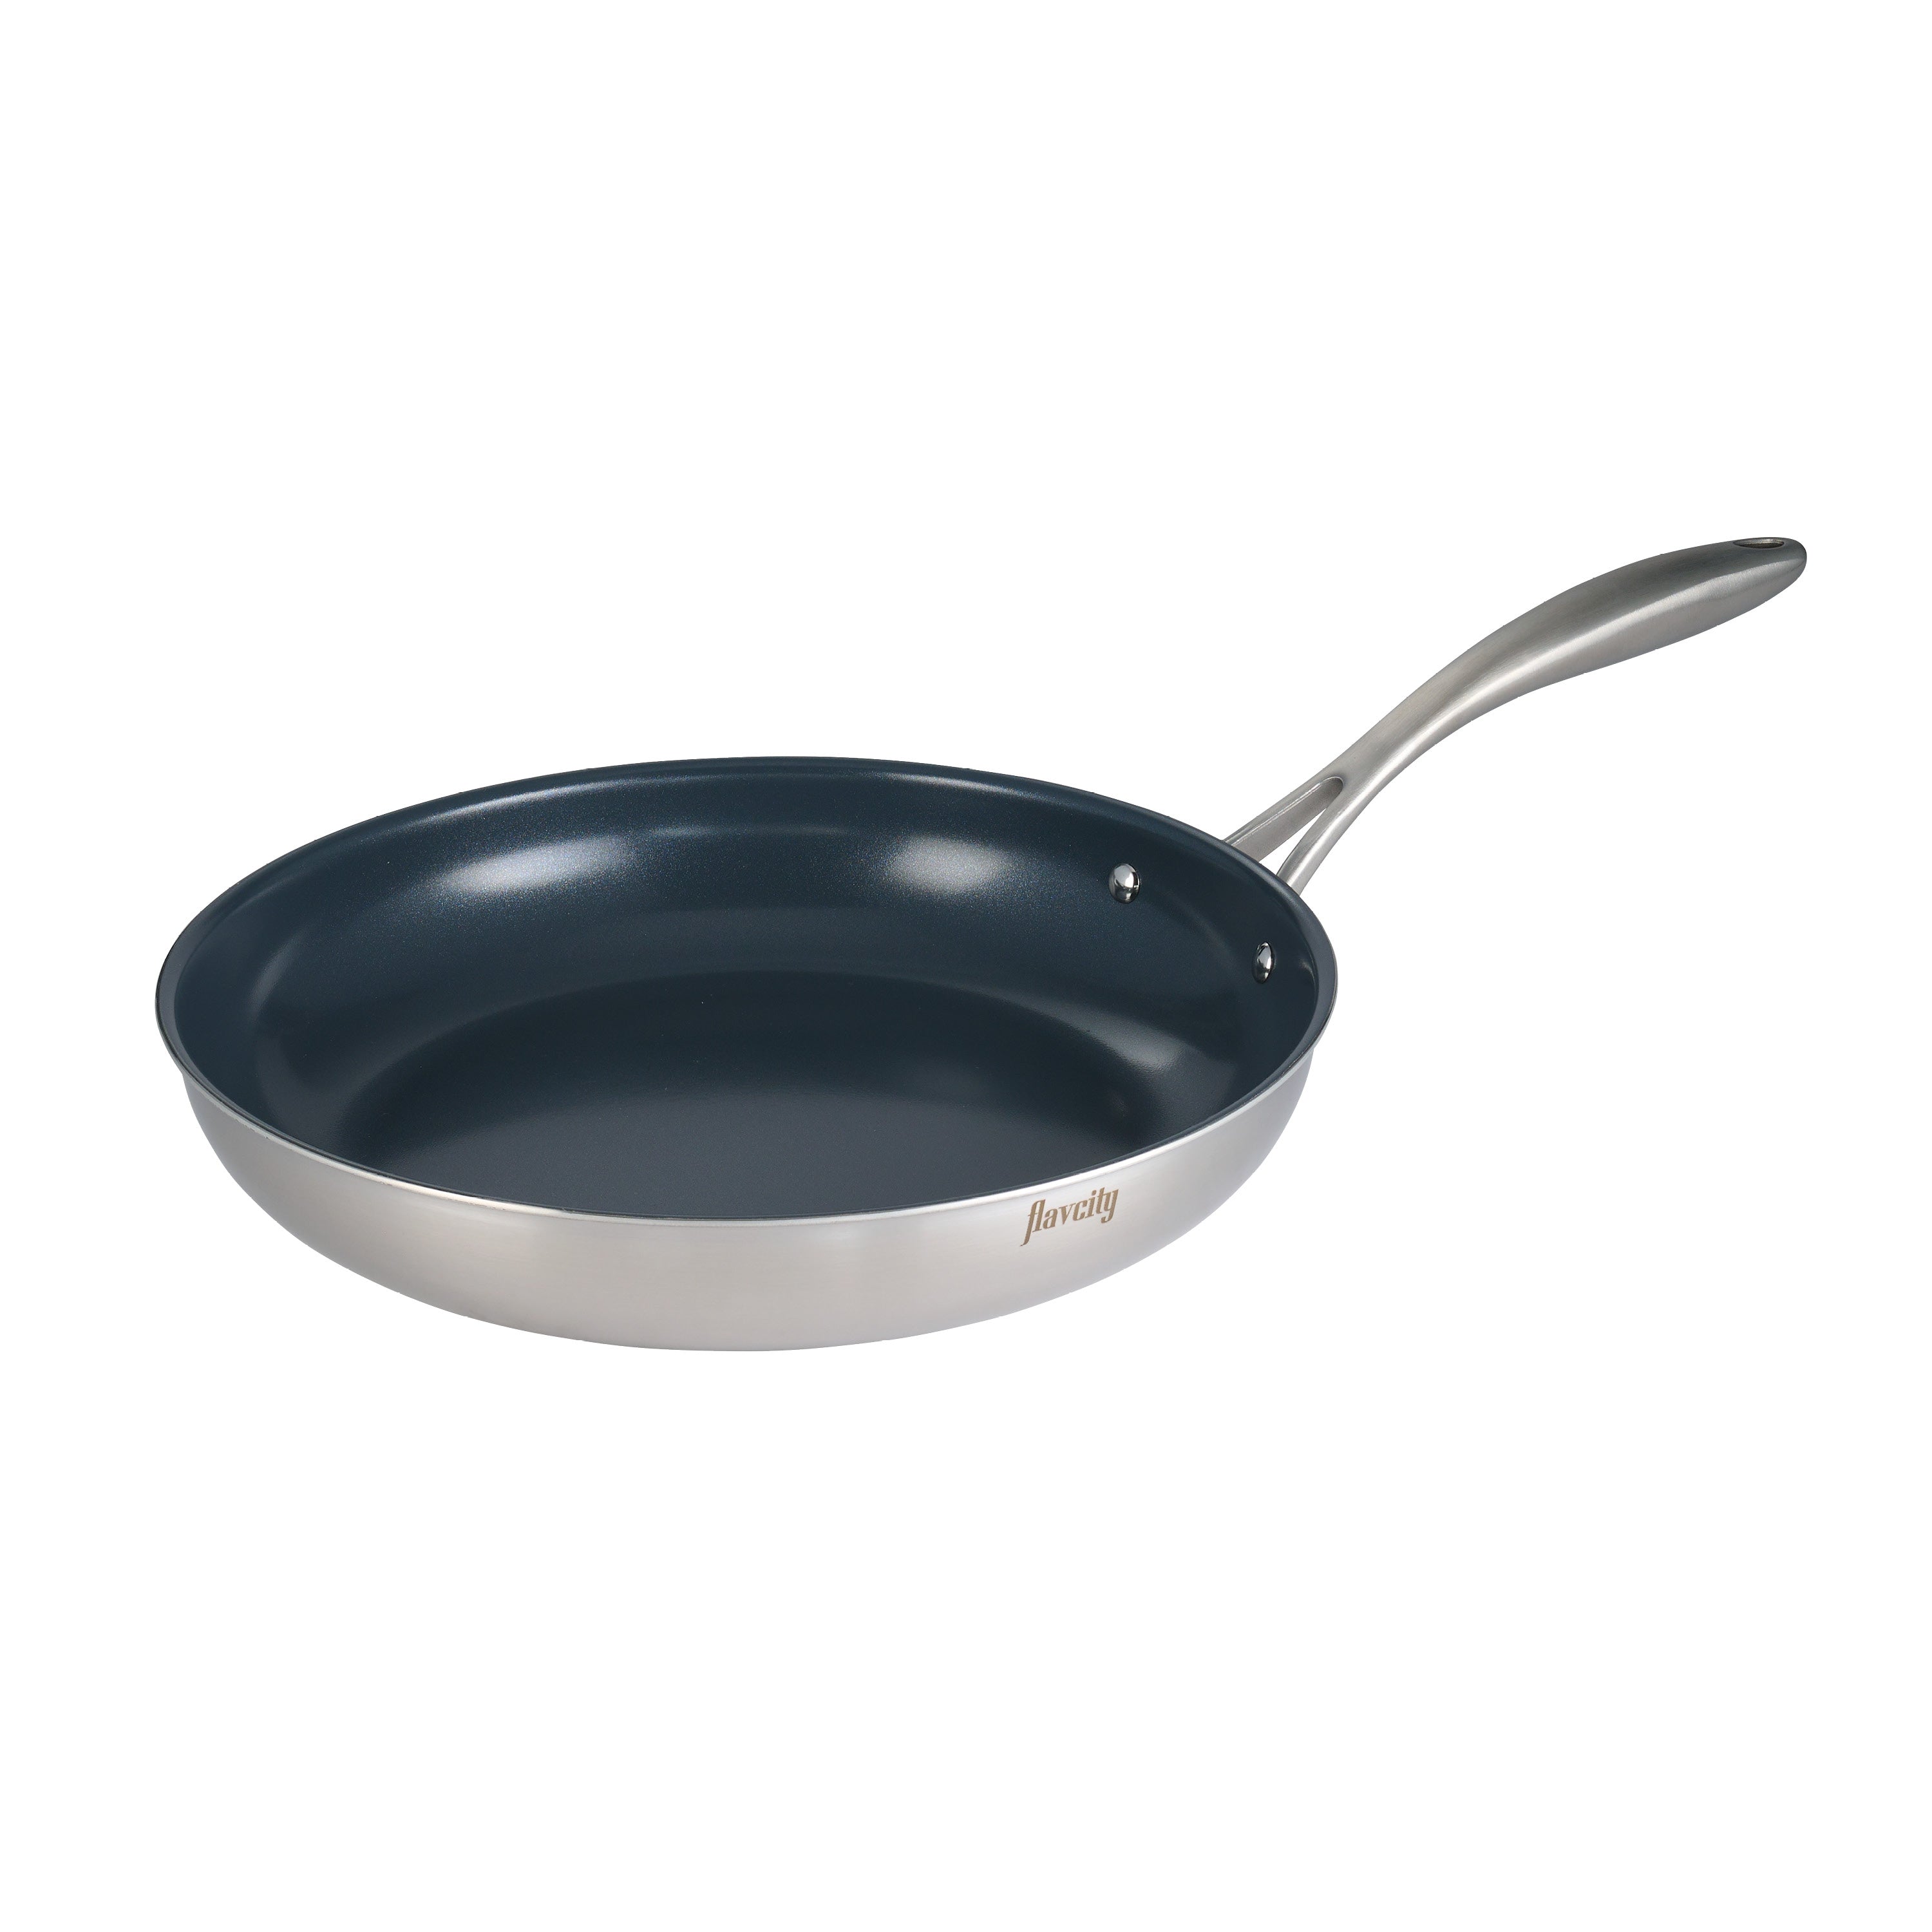 Ceramic Fry Pan Trio, Non-Toxic Coating for Frying